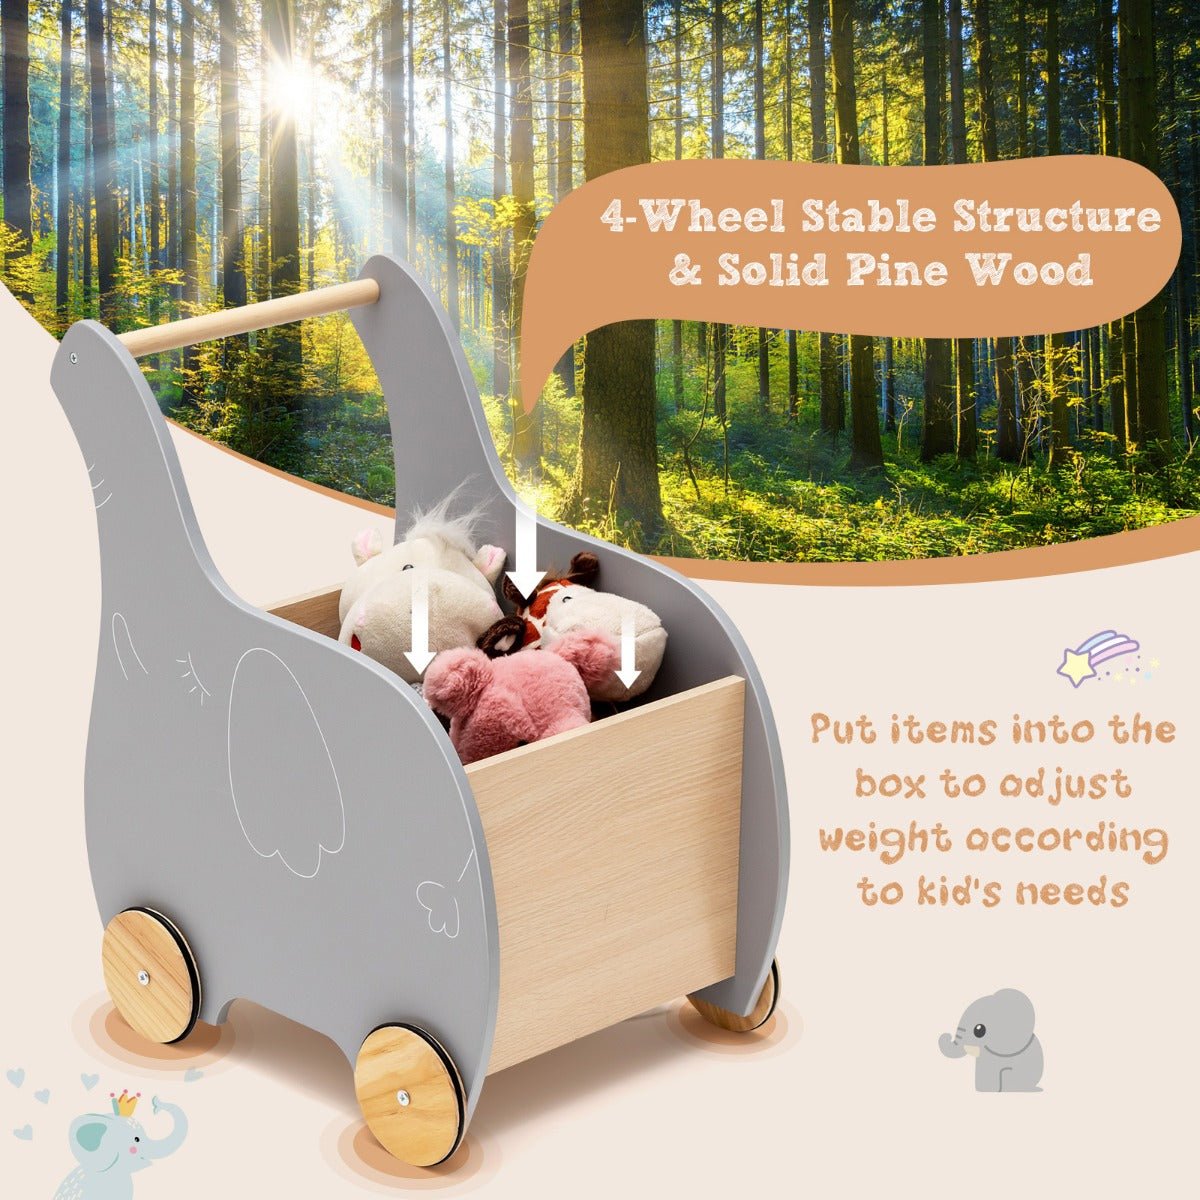  Wooden Kids Shopping Trolley - Rubber Wheels, Imaginative Play Experience